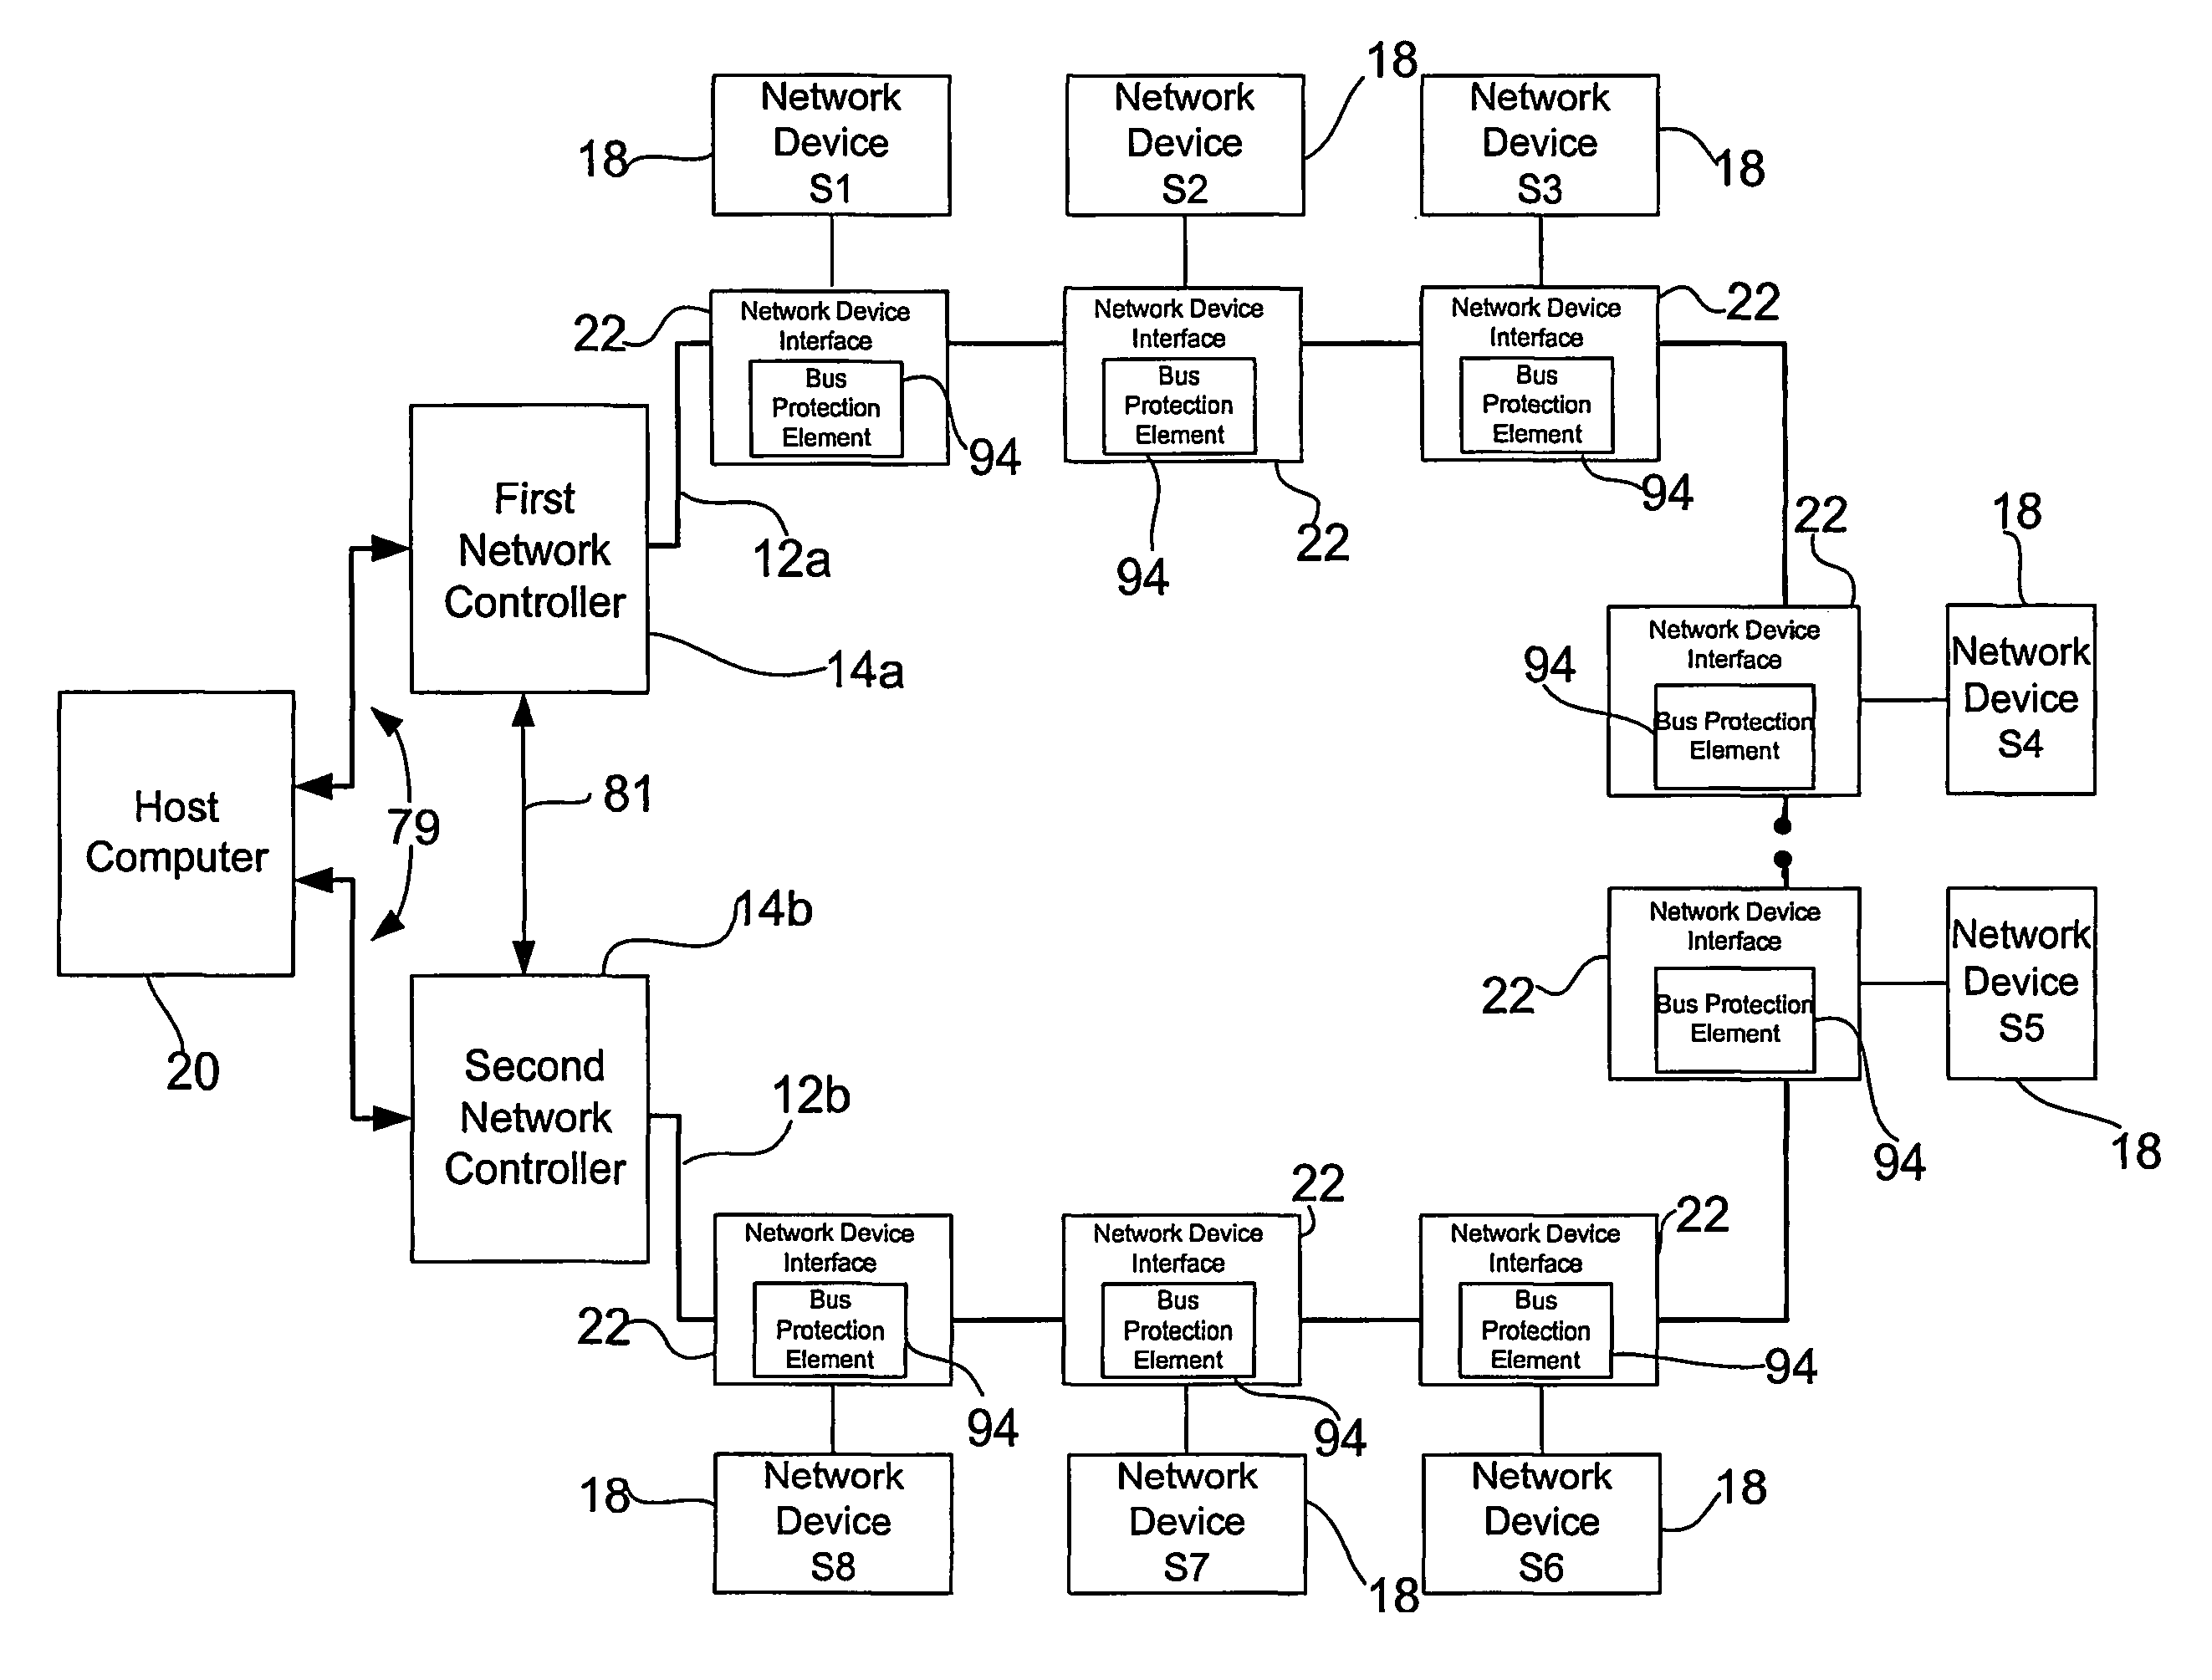 System and method for maintaining proper termination and error-free communication in a network bus